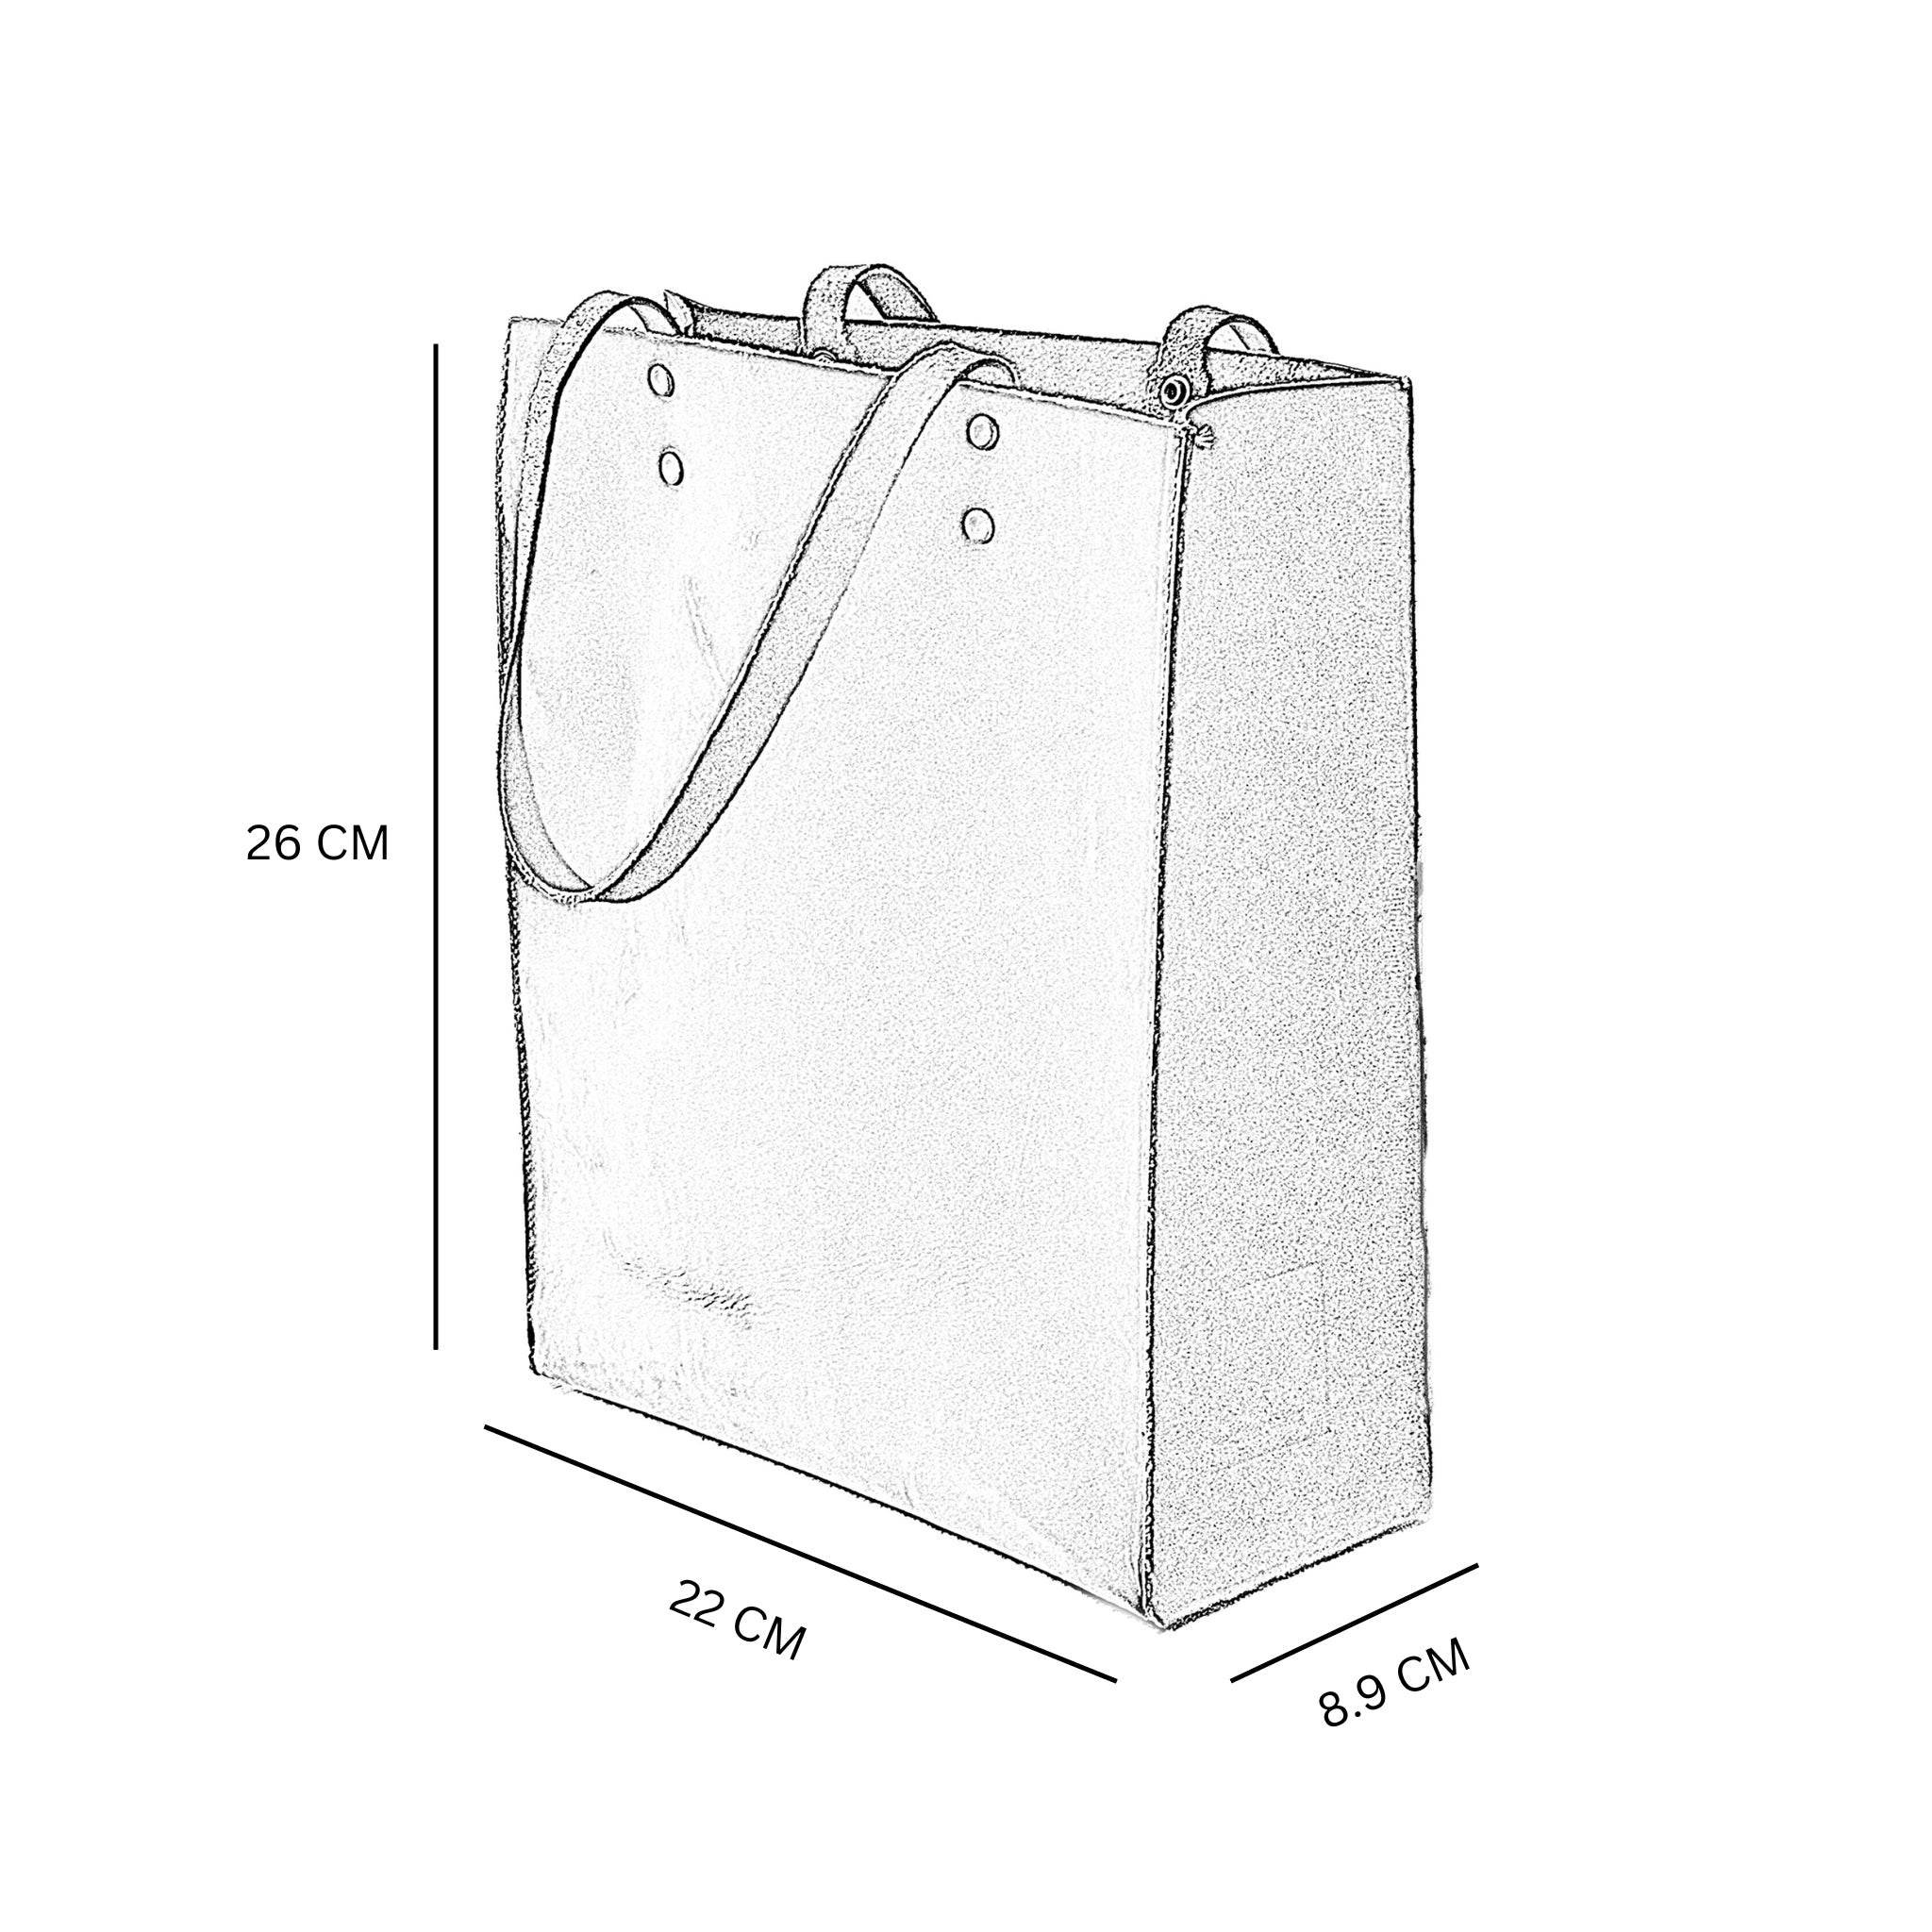 Re:Bag - Small